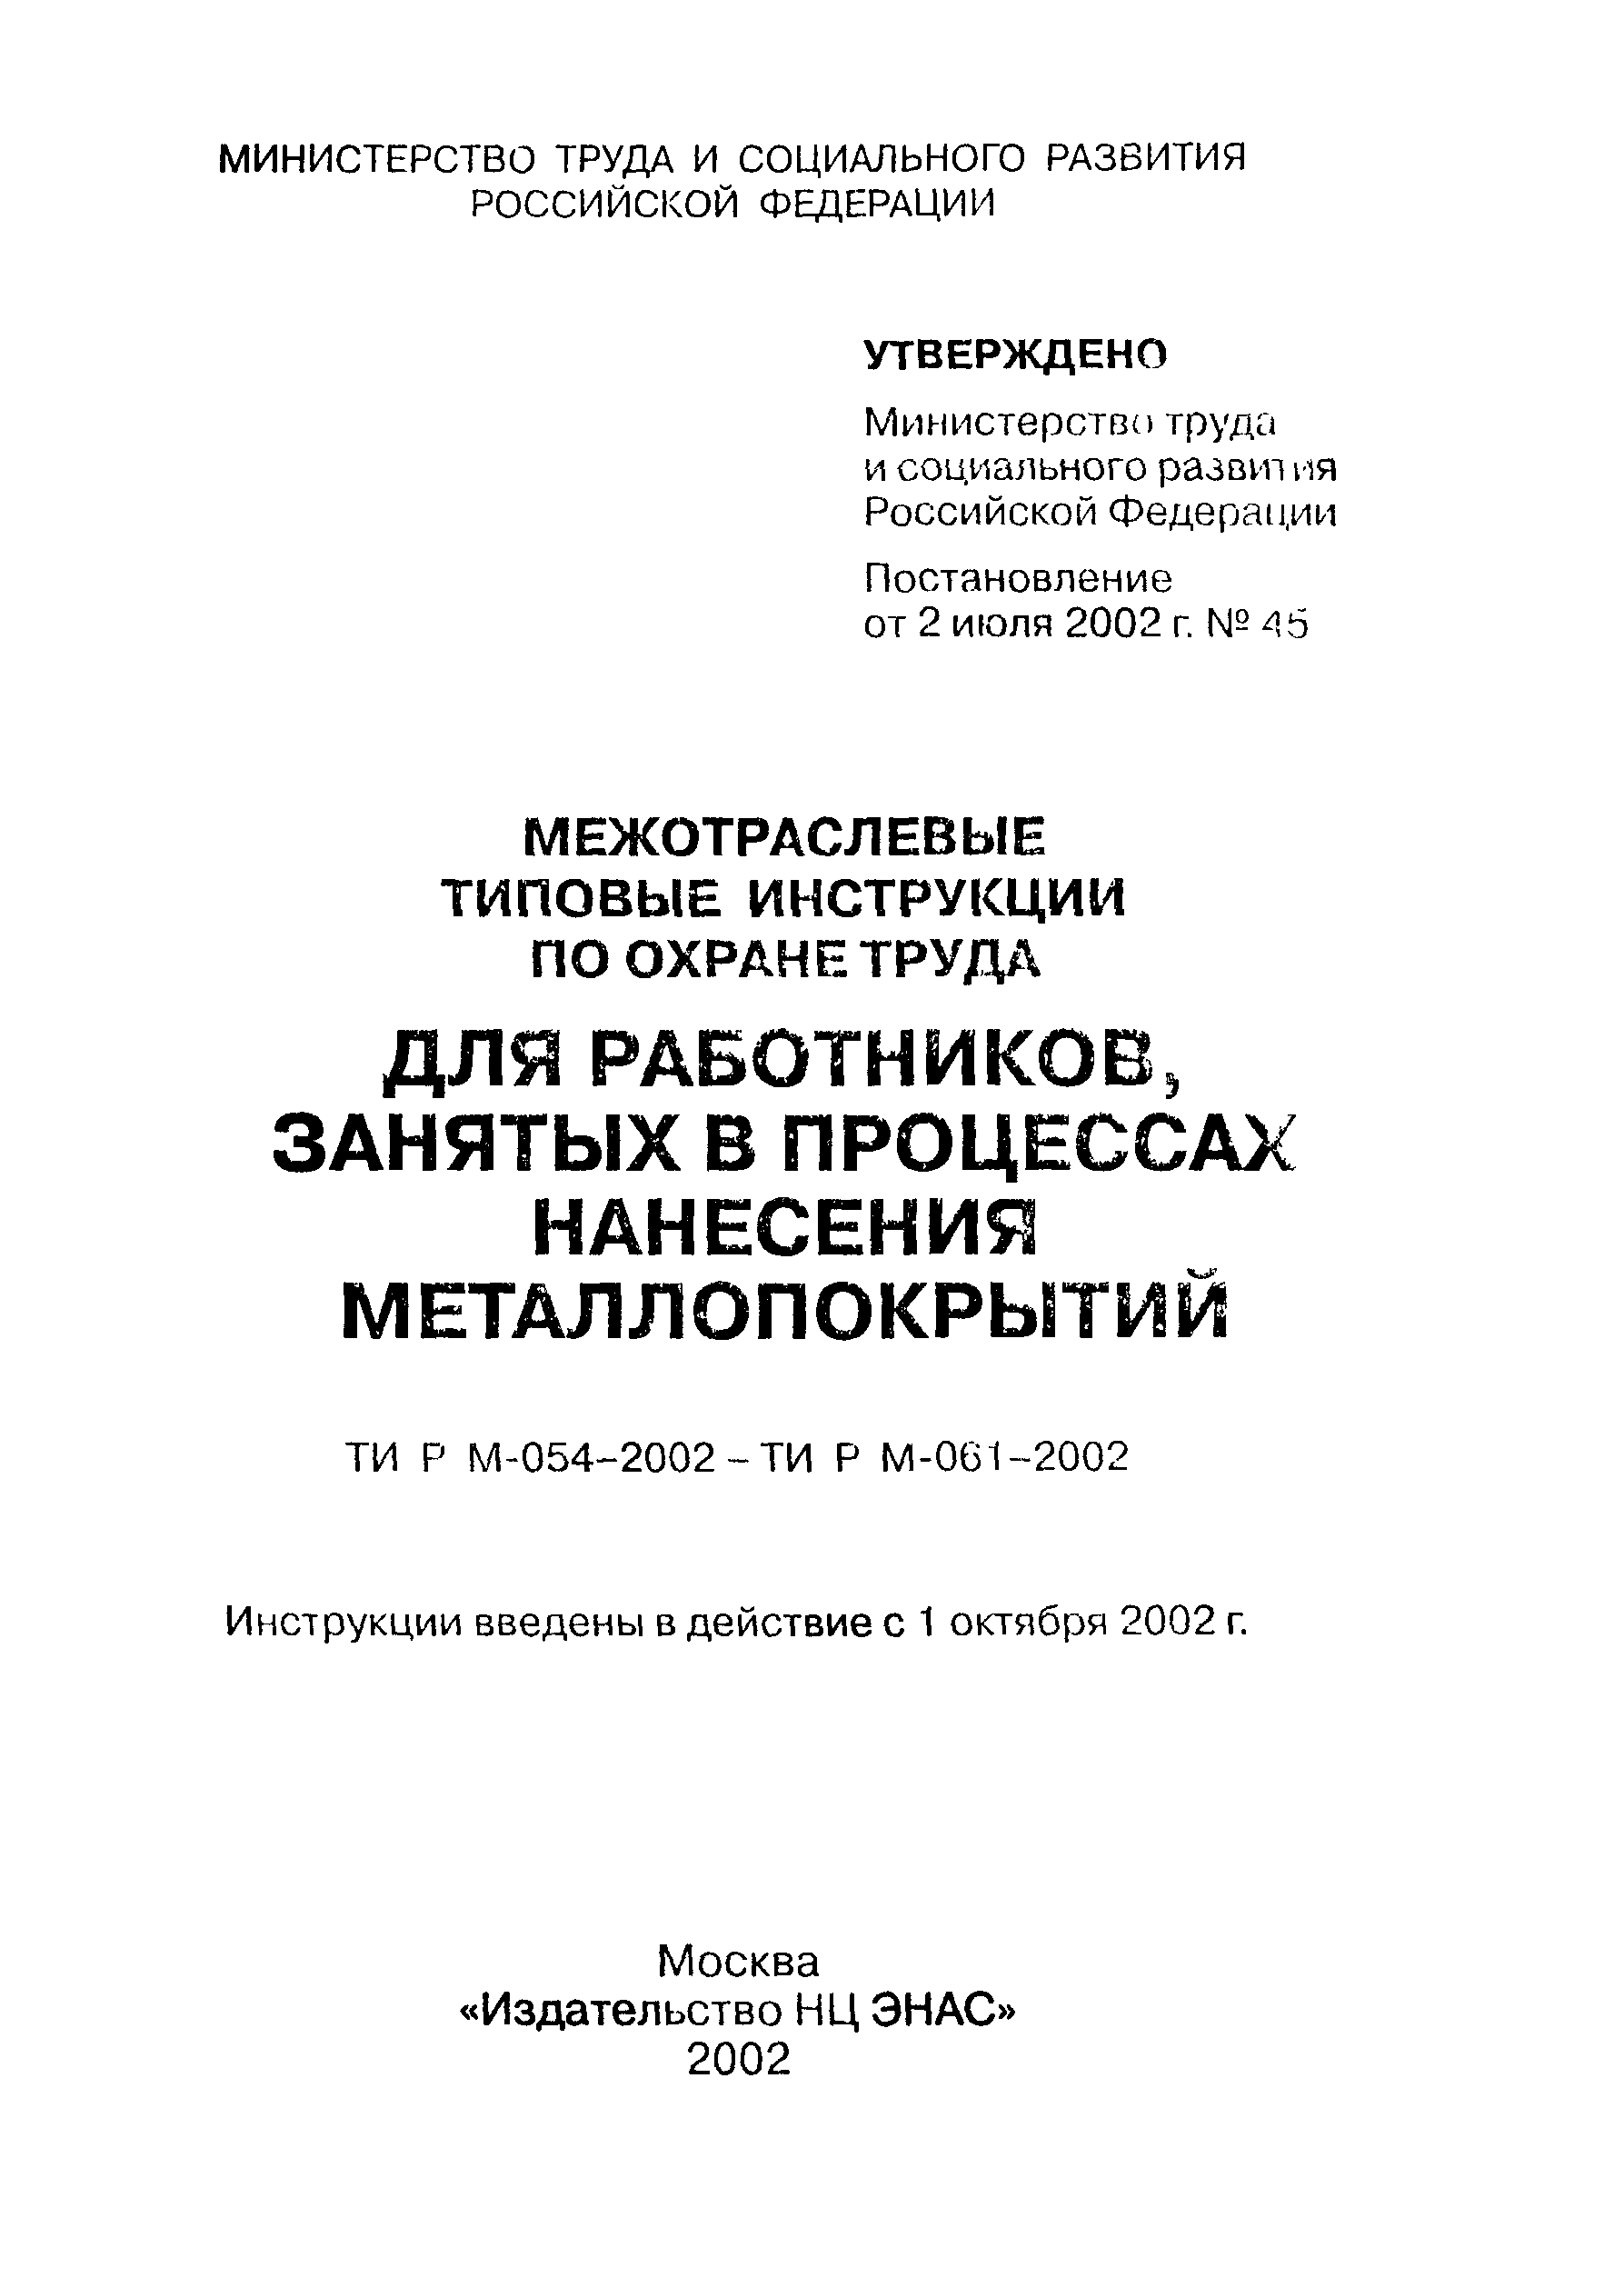 ТИ Р М-061-2002